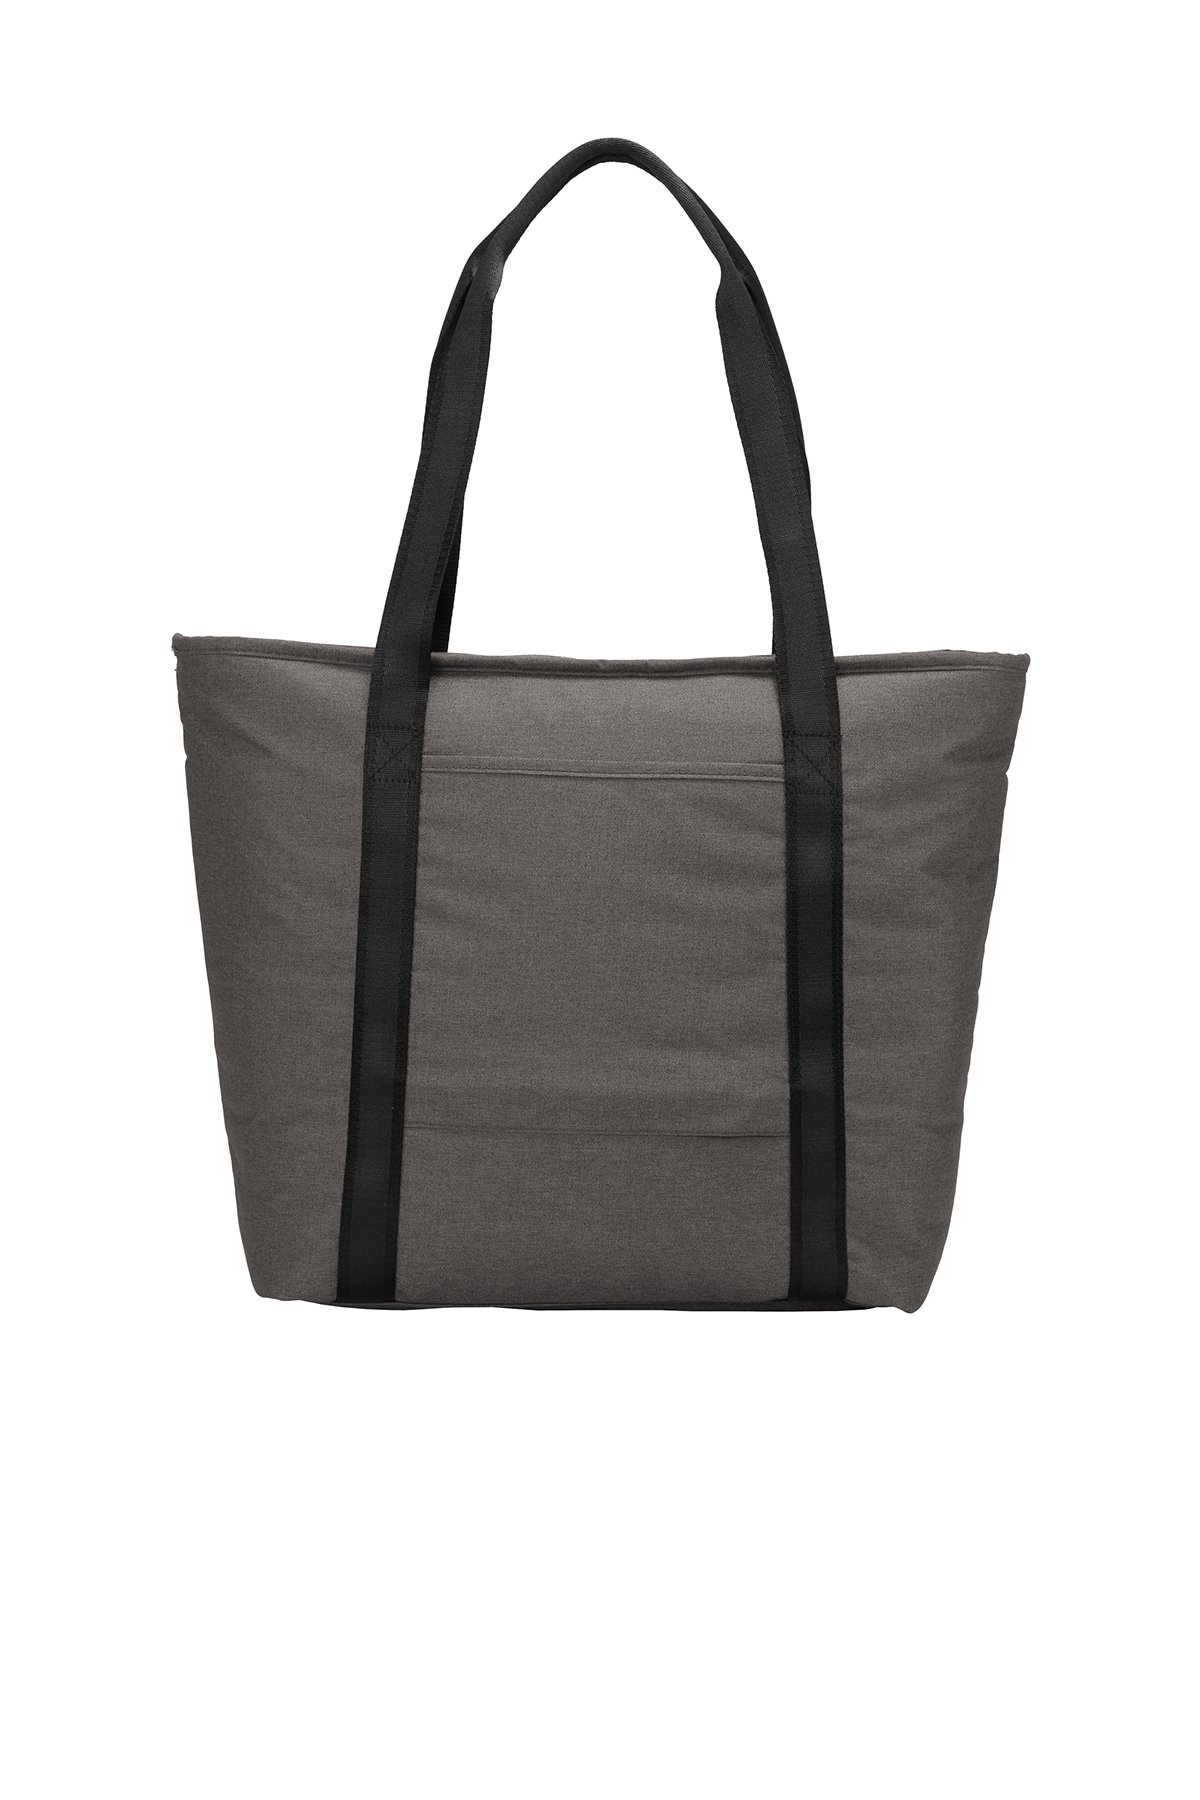 Ogio® Downtown Bling Tote - RCG4654